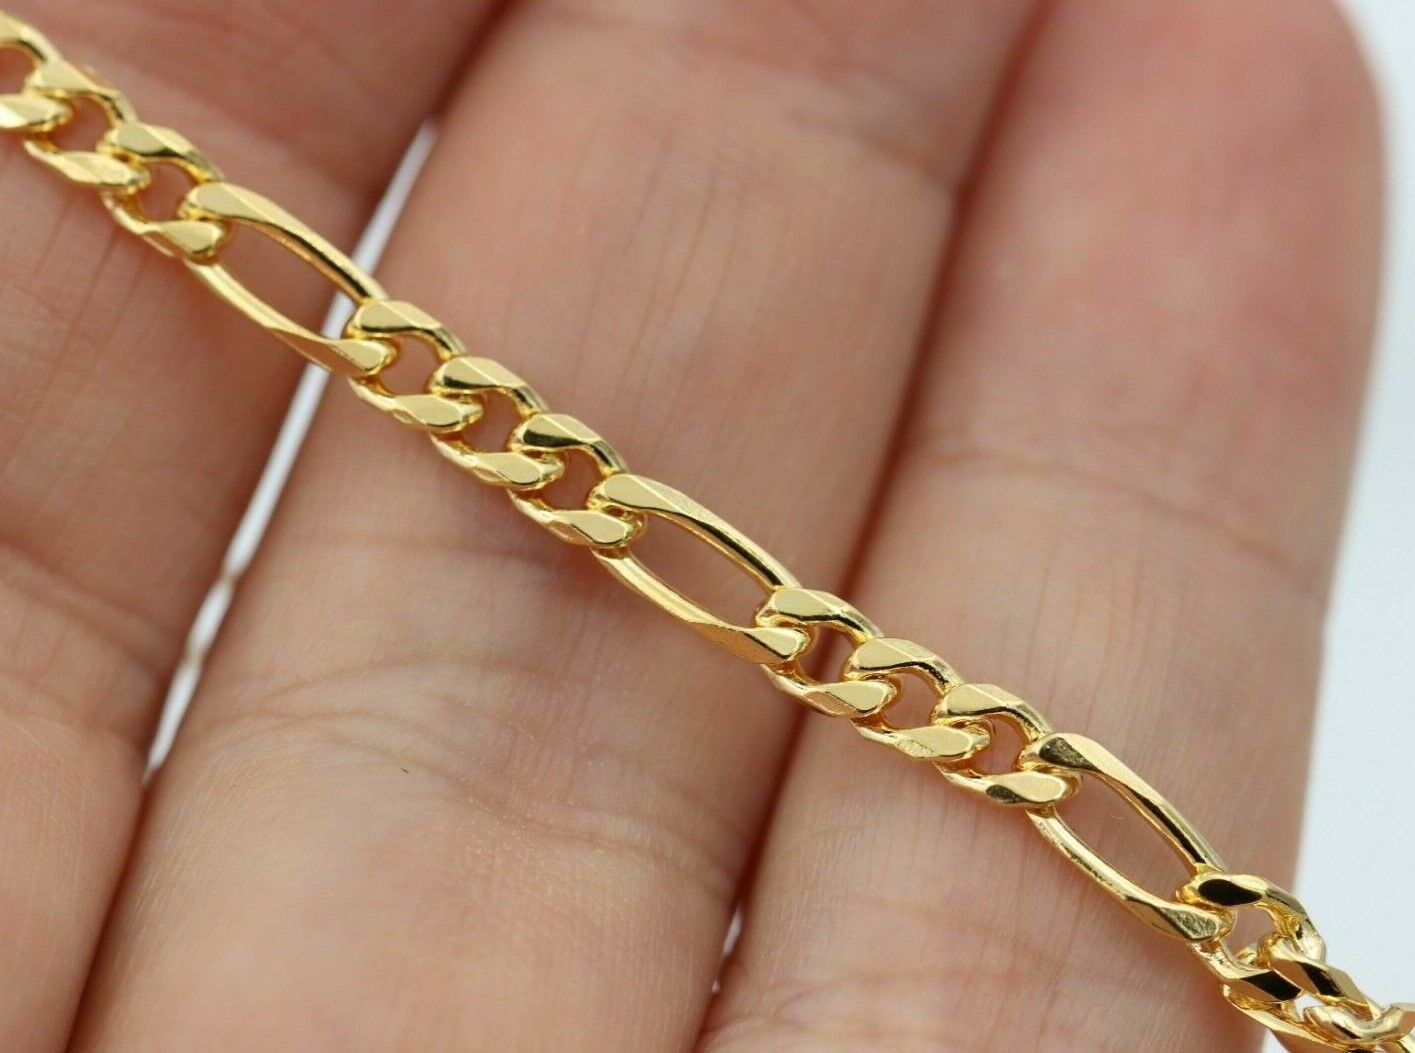 9ct Gold Anklet Gift Boxed Fully Hallmarked Ankle Bracelet - Solid 9ct Gold  | eBay